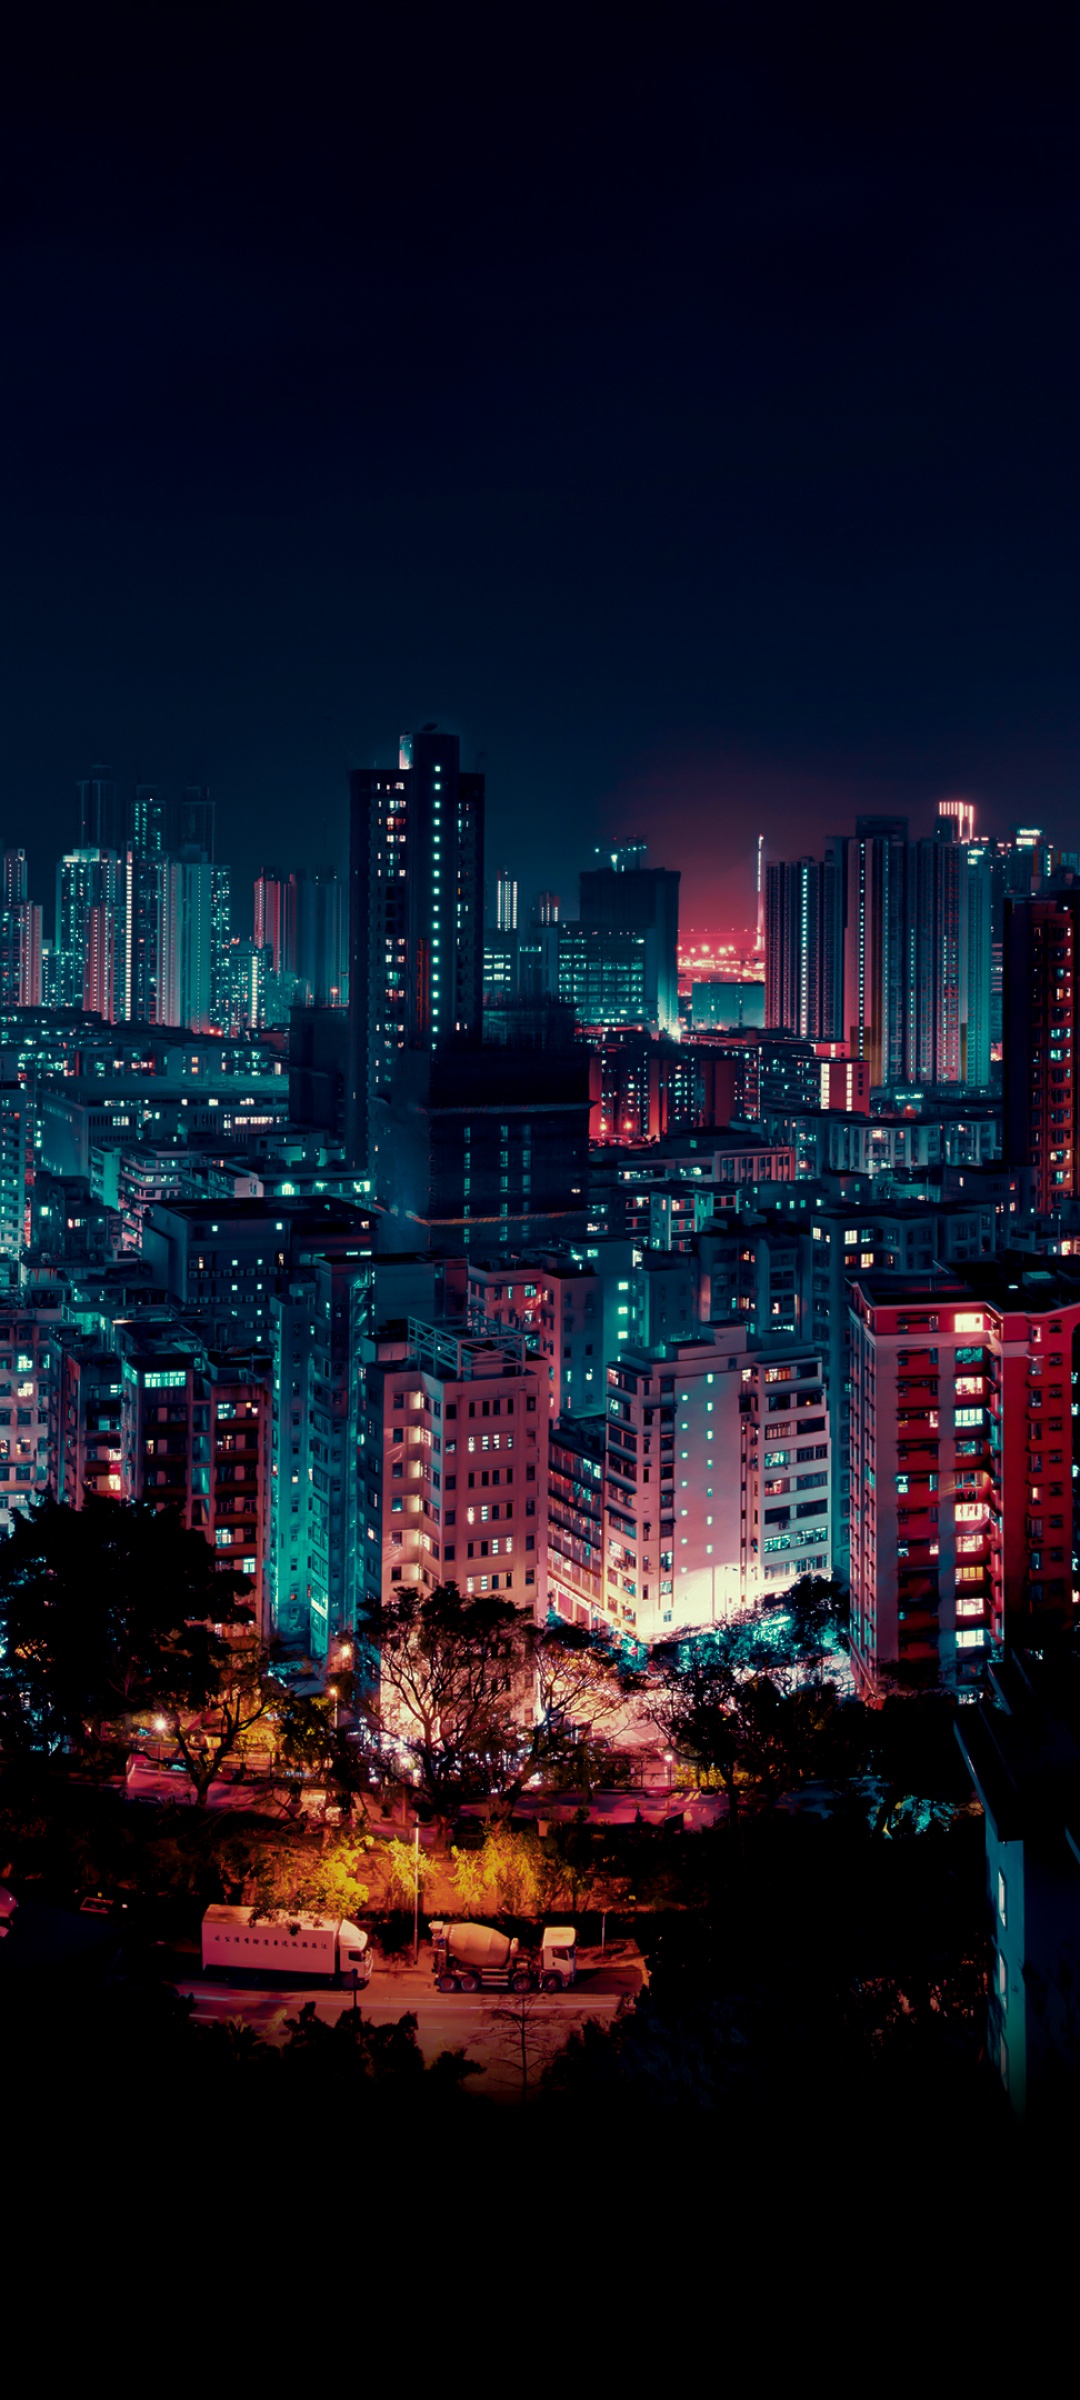 Download wallpaper 938x1668 night city buildings city lights iphone  876s6 for parallax hd background